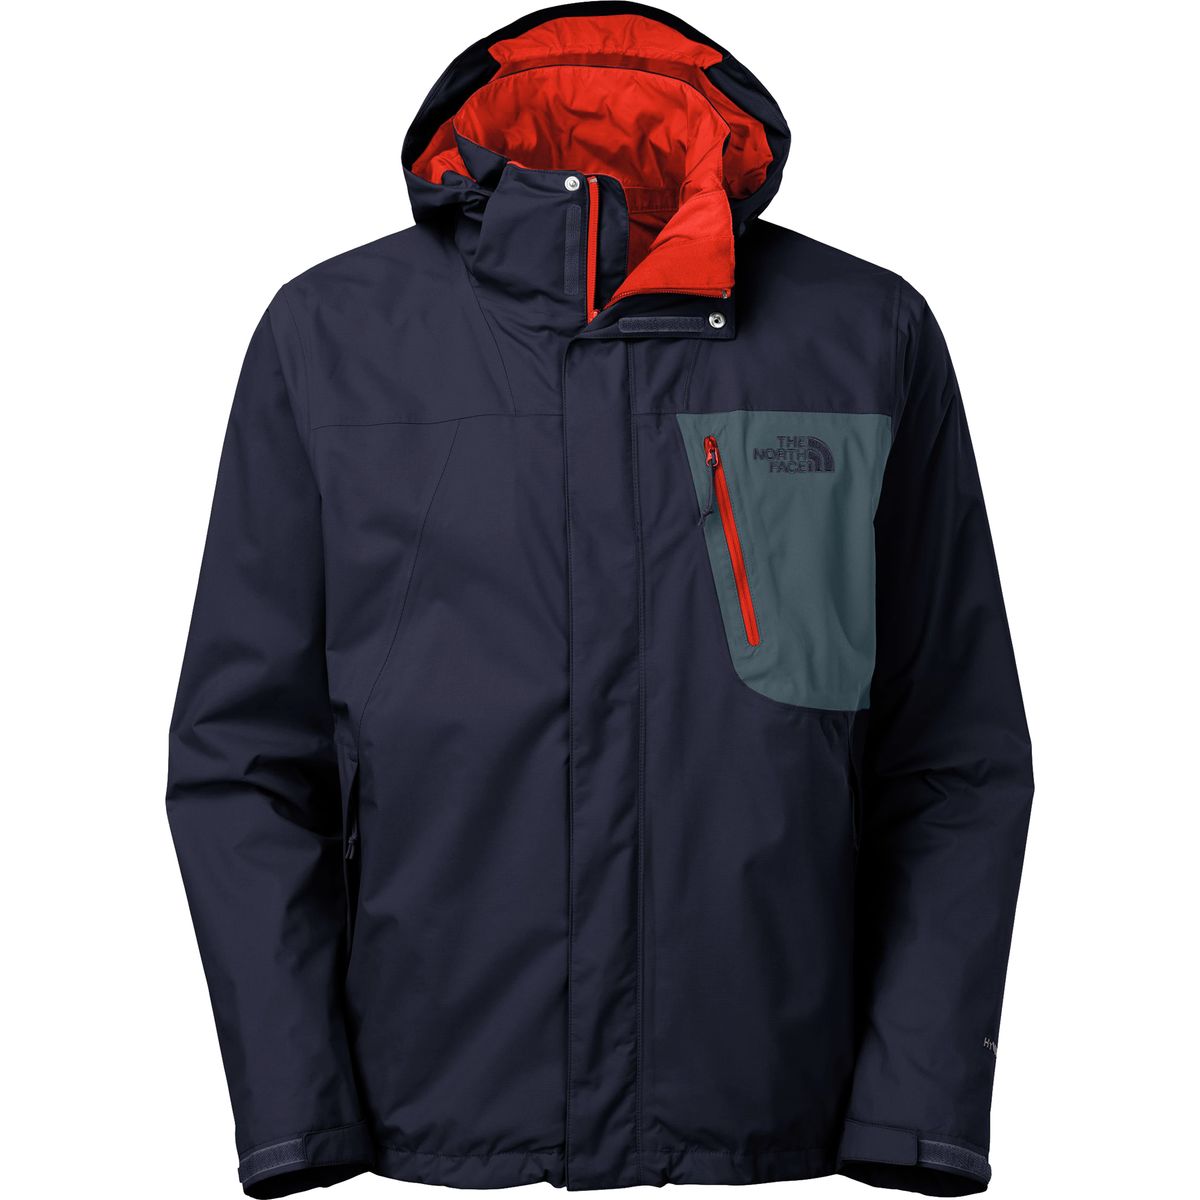 The North Face Varius Guide Jacket - Men's - Clothing